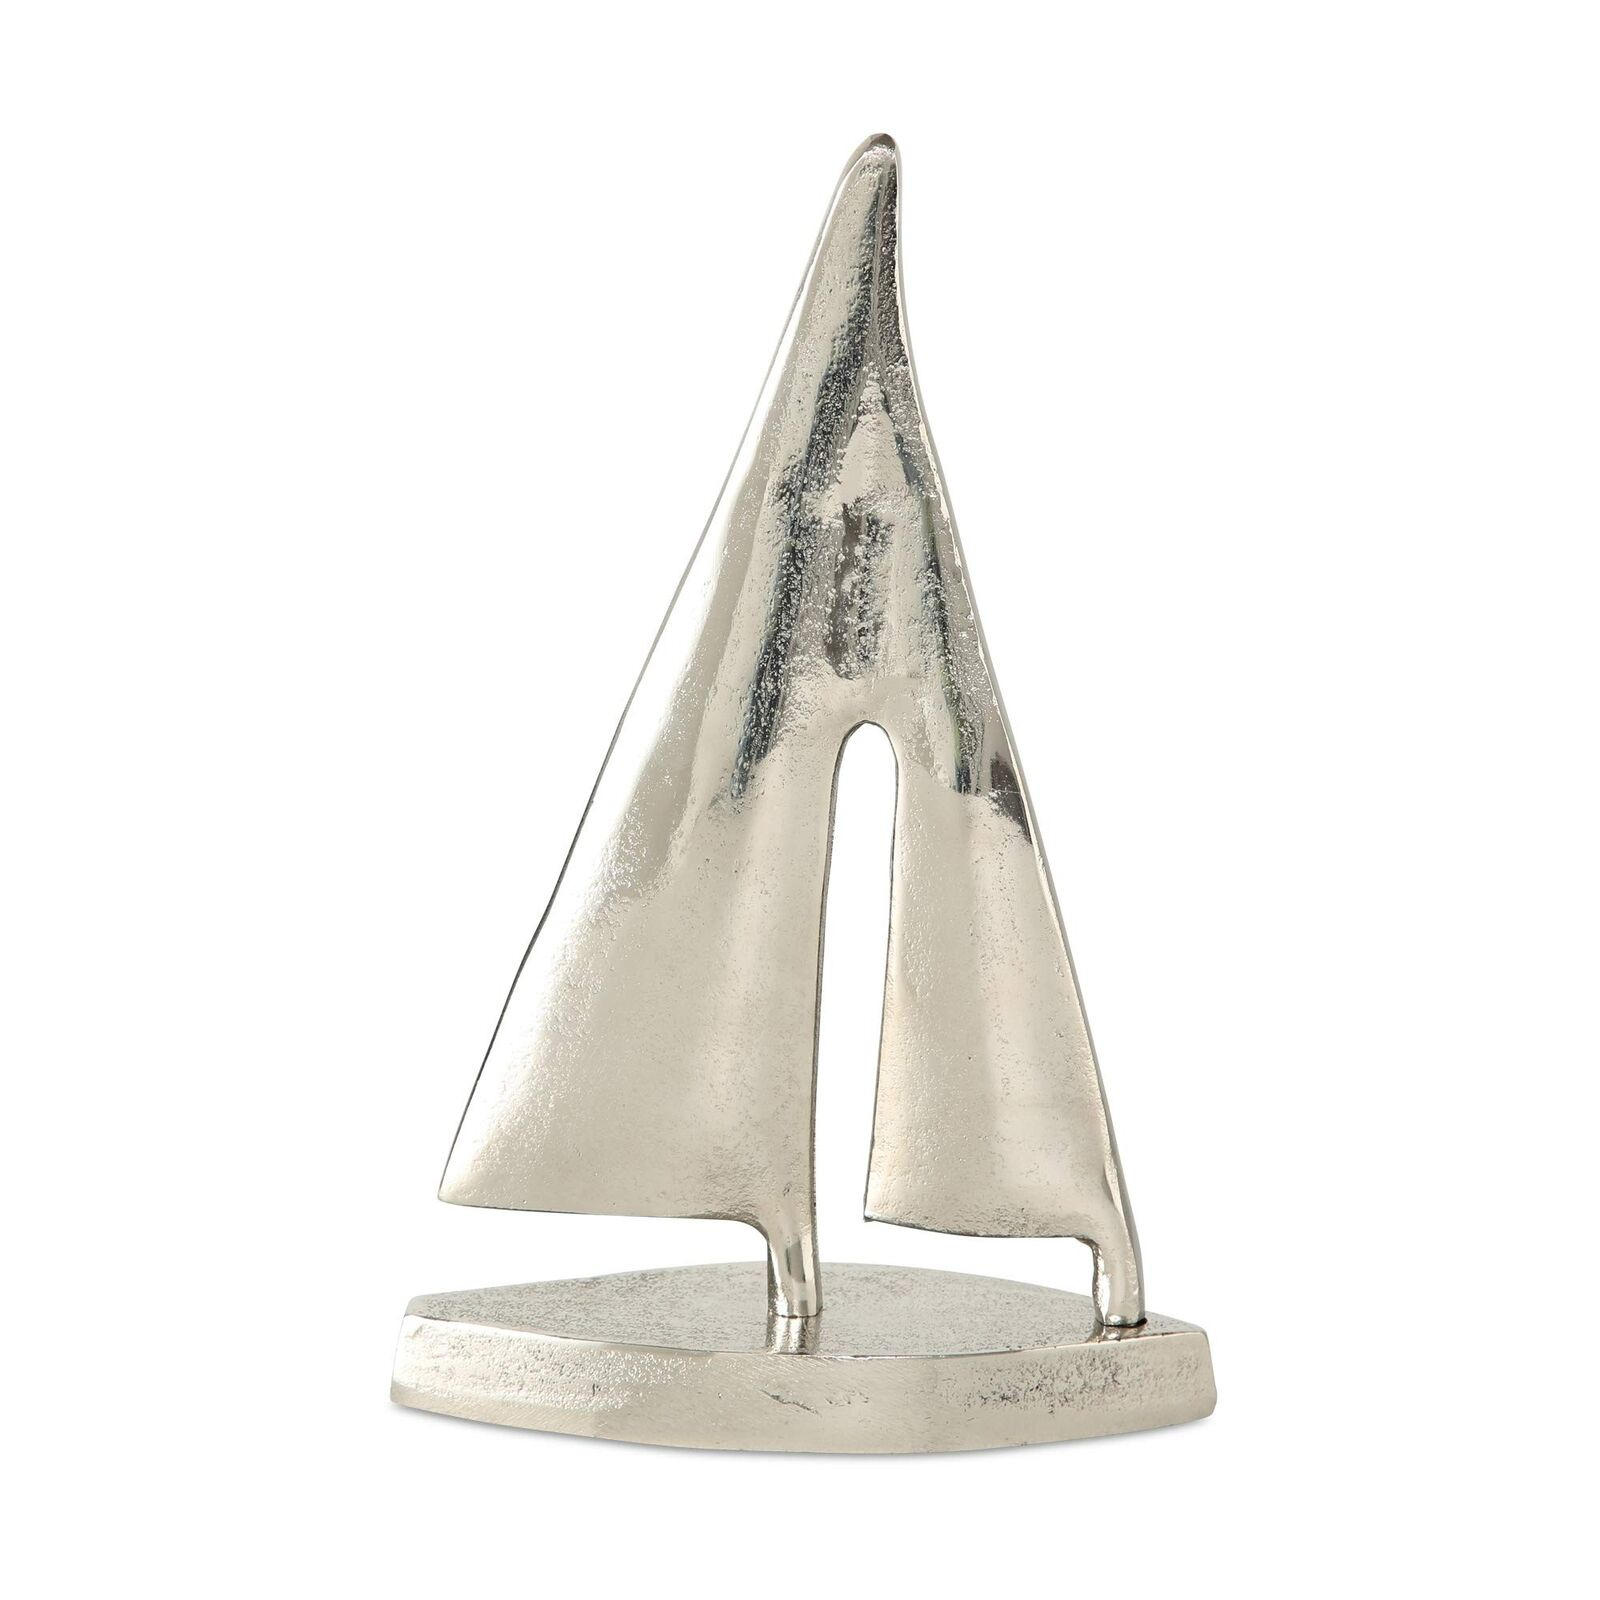 WHW Whole House Worlds Silver Spinnaker Sail Boat Sculpture, Polished Aluminu...